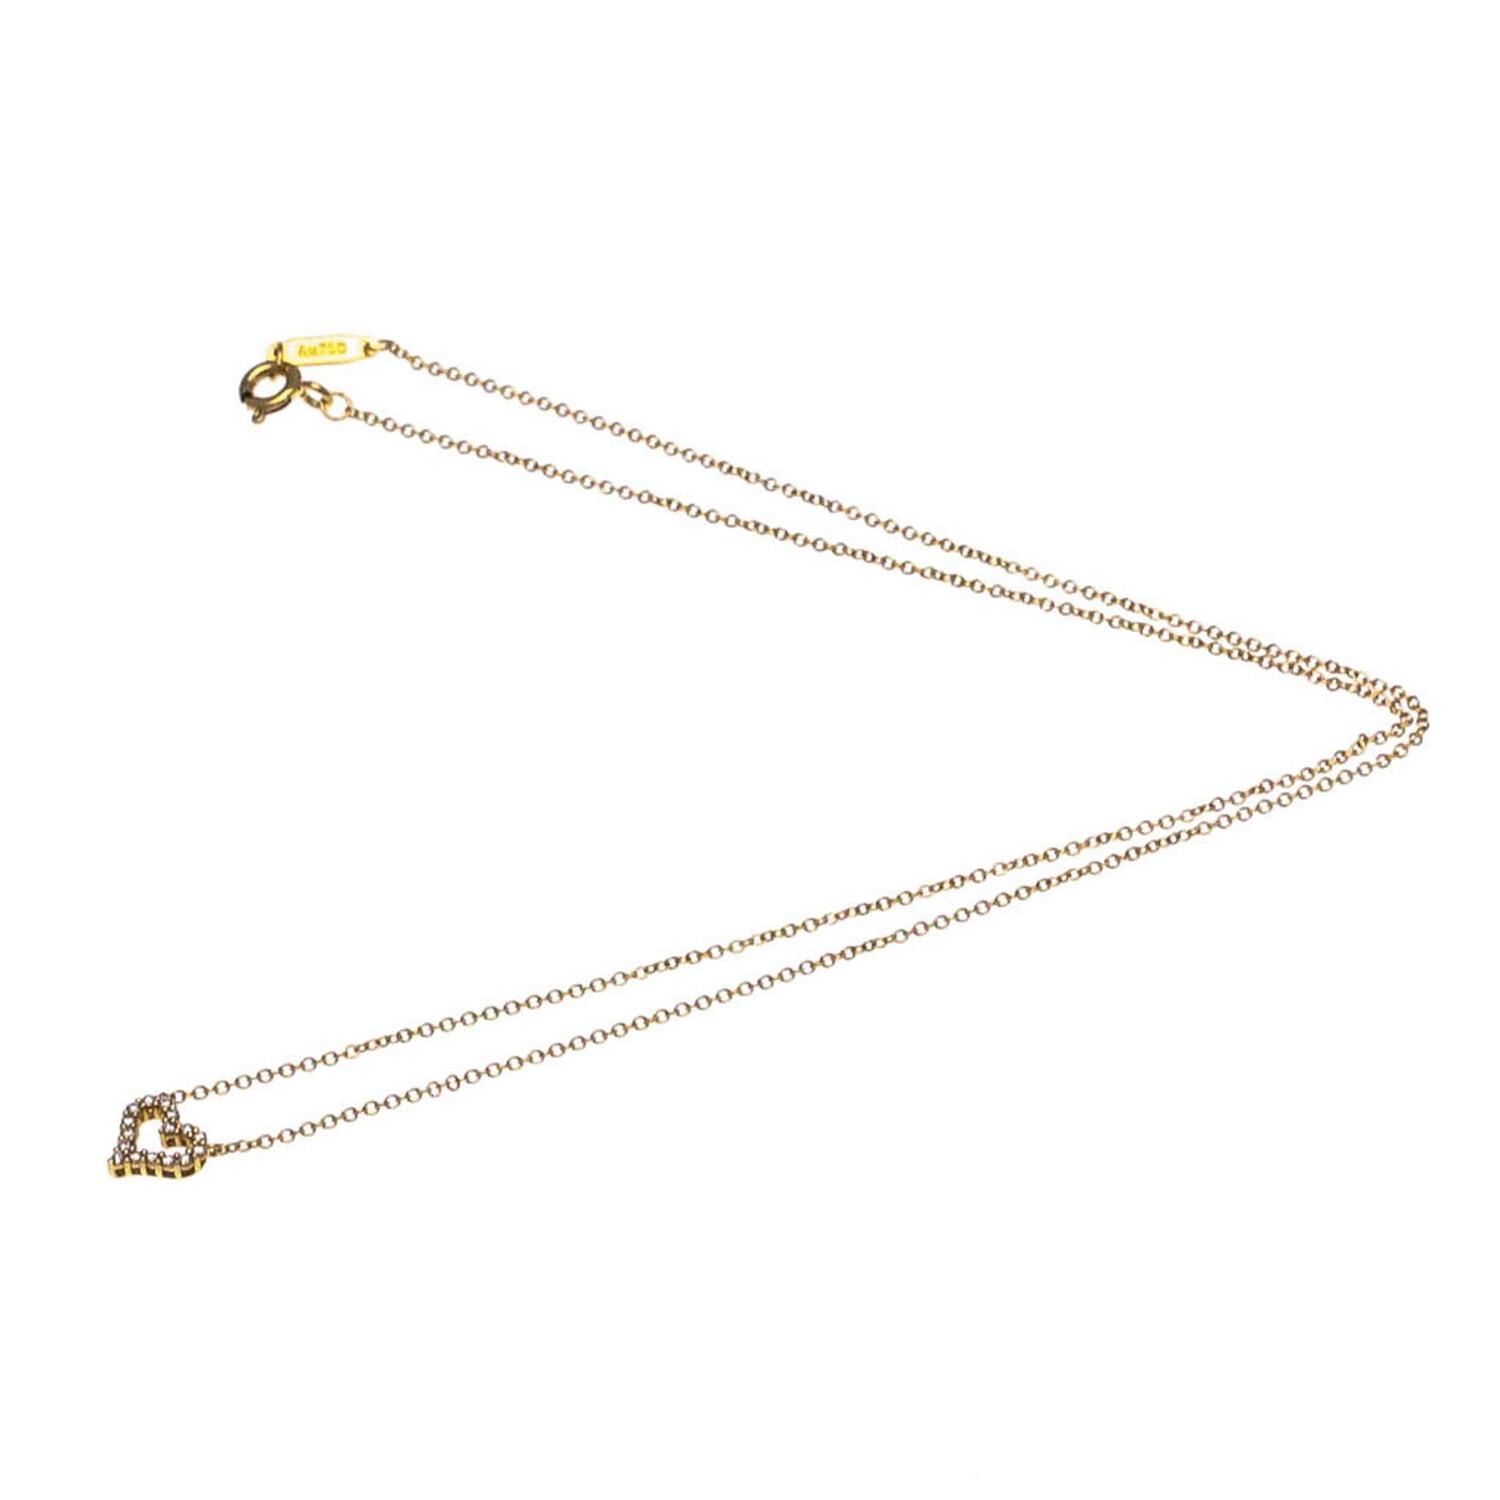 Tiffany & Co. // 18k Rose Gold Heart Necklace With Diamond // 15.74 ...